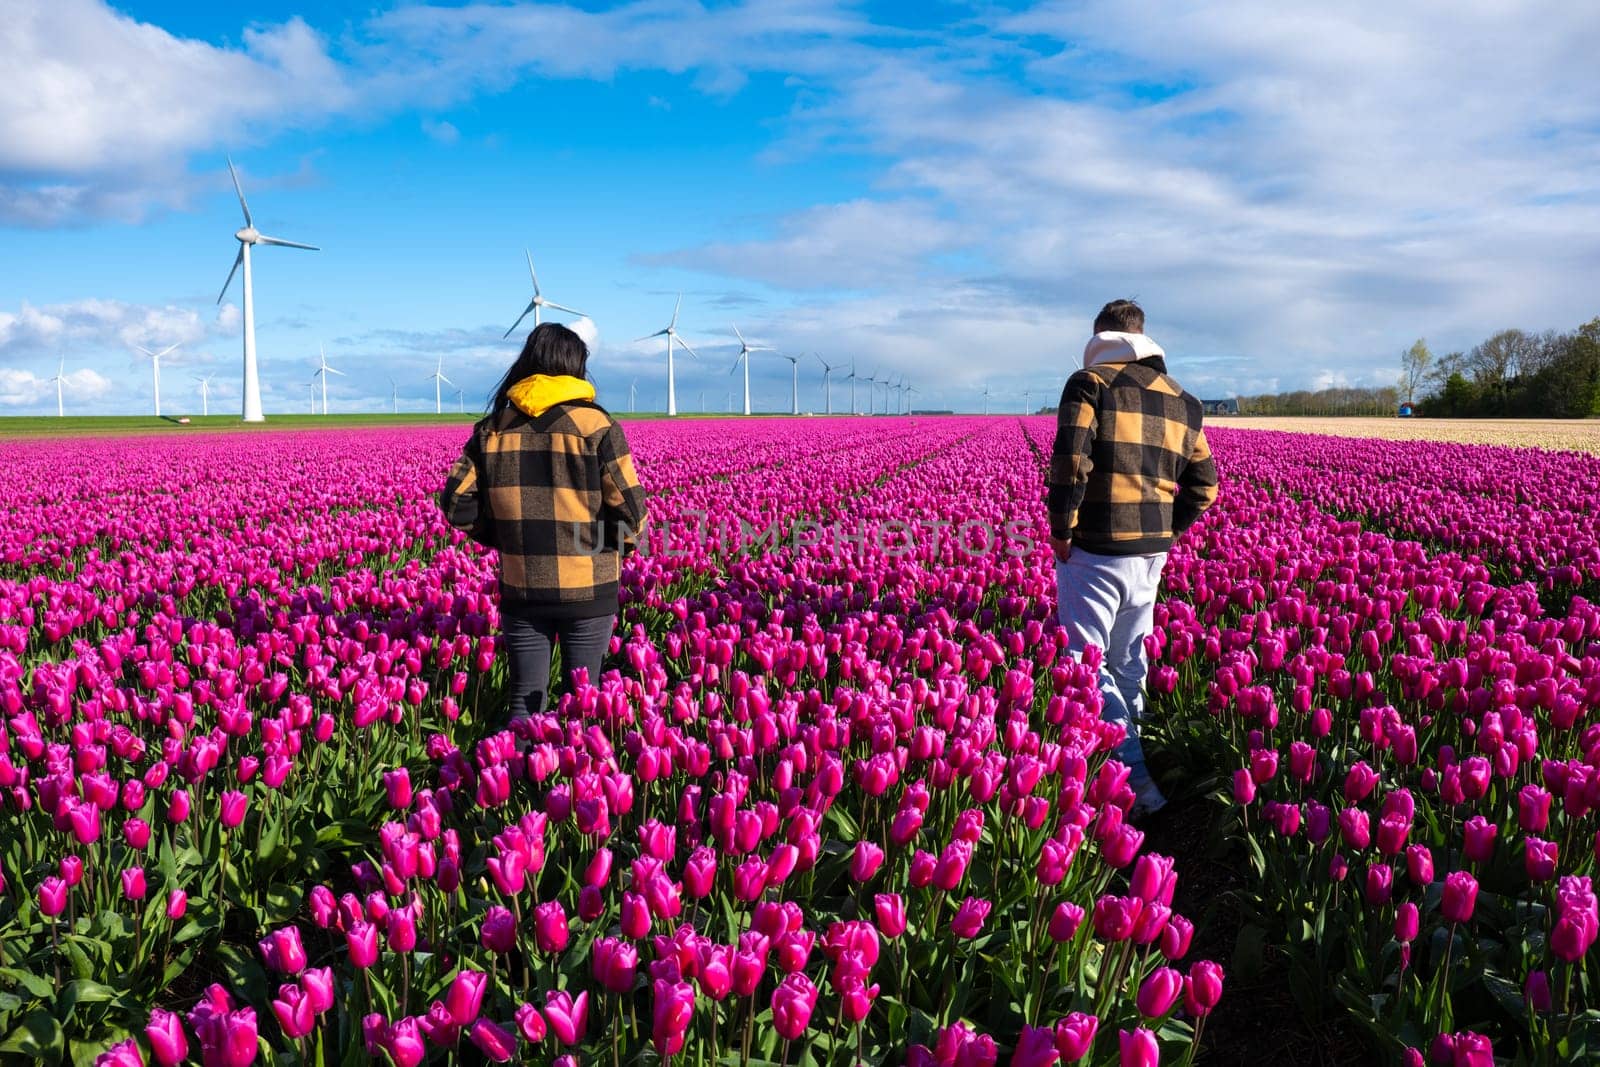 Two individuals stand gracefully in a vibrant field of purple tulips, surrounded by the beauty of spring in the Netherlands by fokkebok